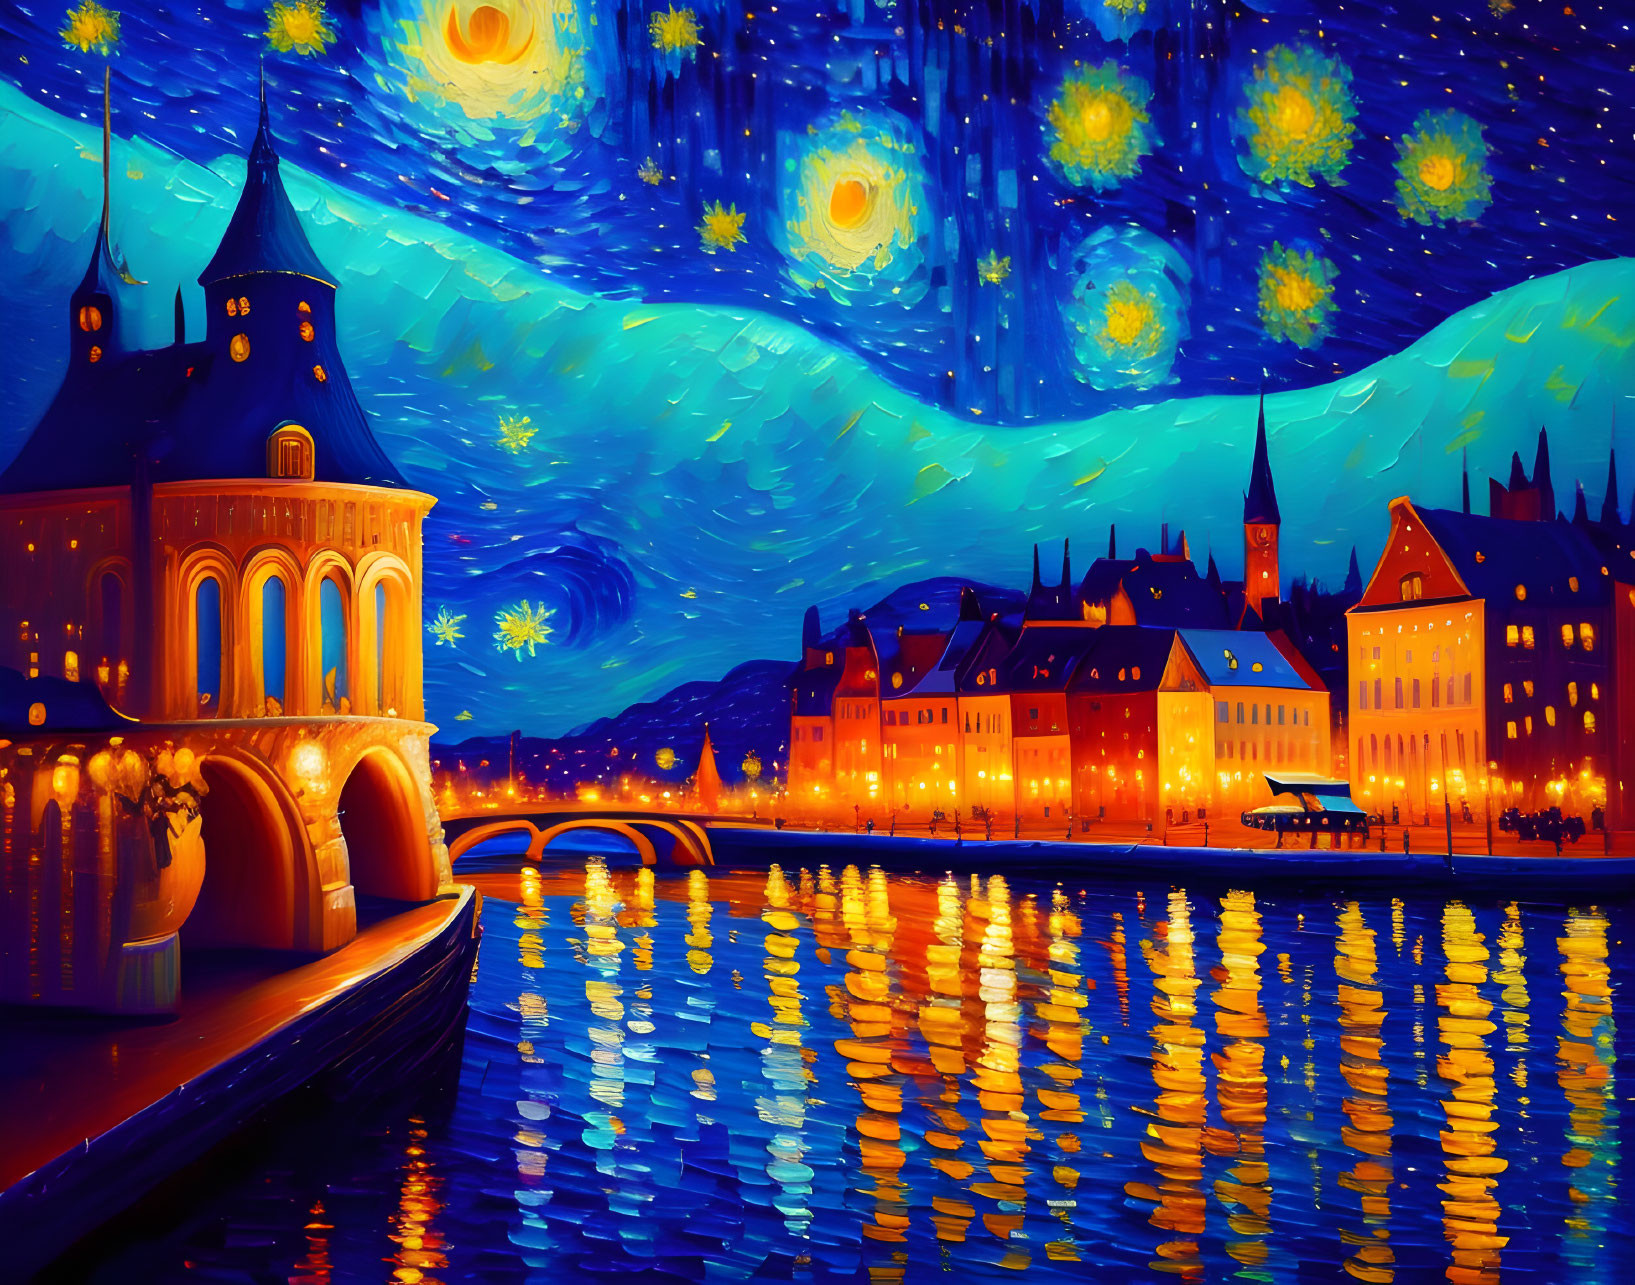 Starry night over riverside town with illuminated buildings